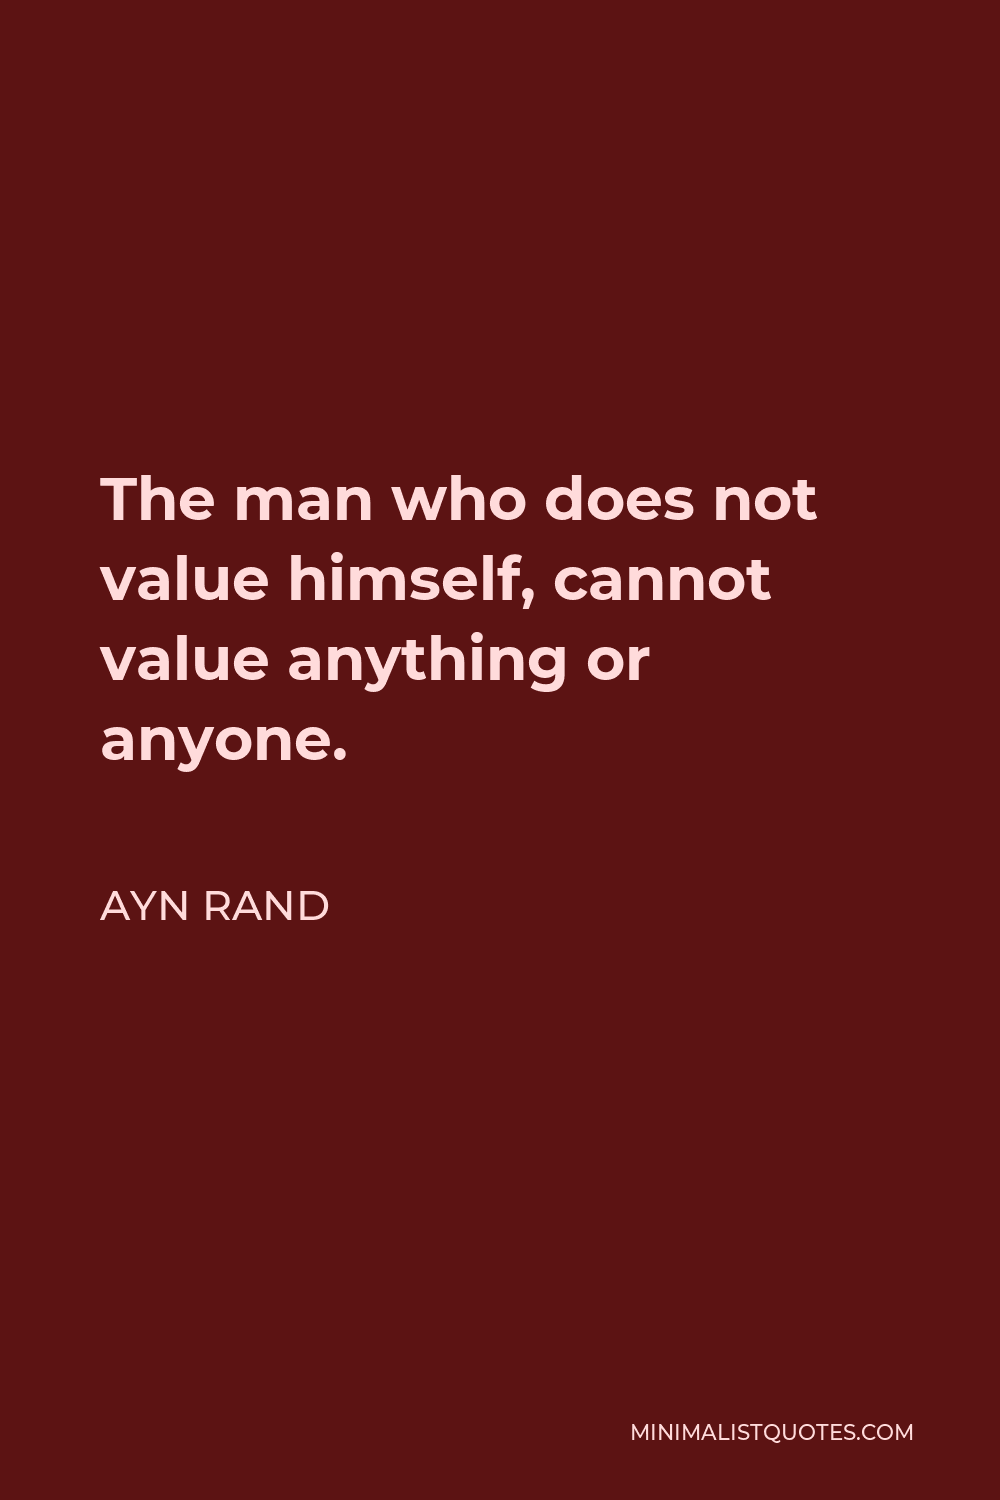 Ayn Rand Quote - The man who does not value himself, cannot value anything or anyone.